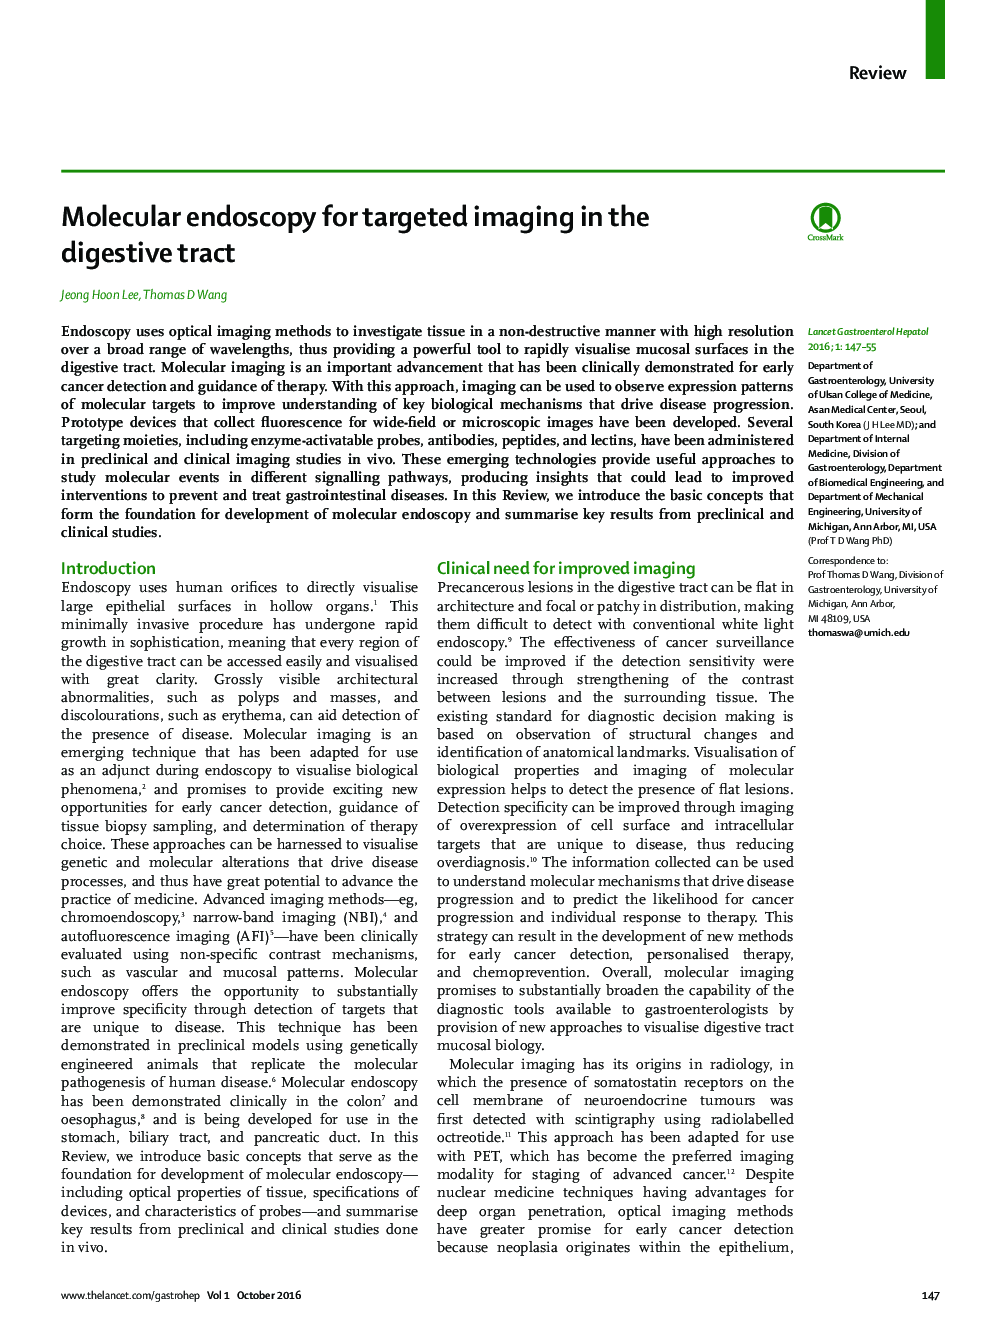 Molecular endoscopy for targeted imaging in the digestive tract